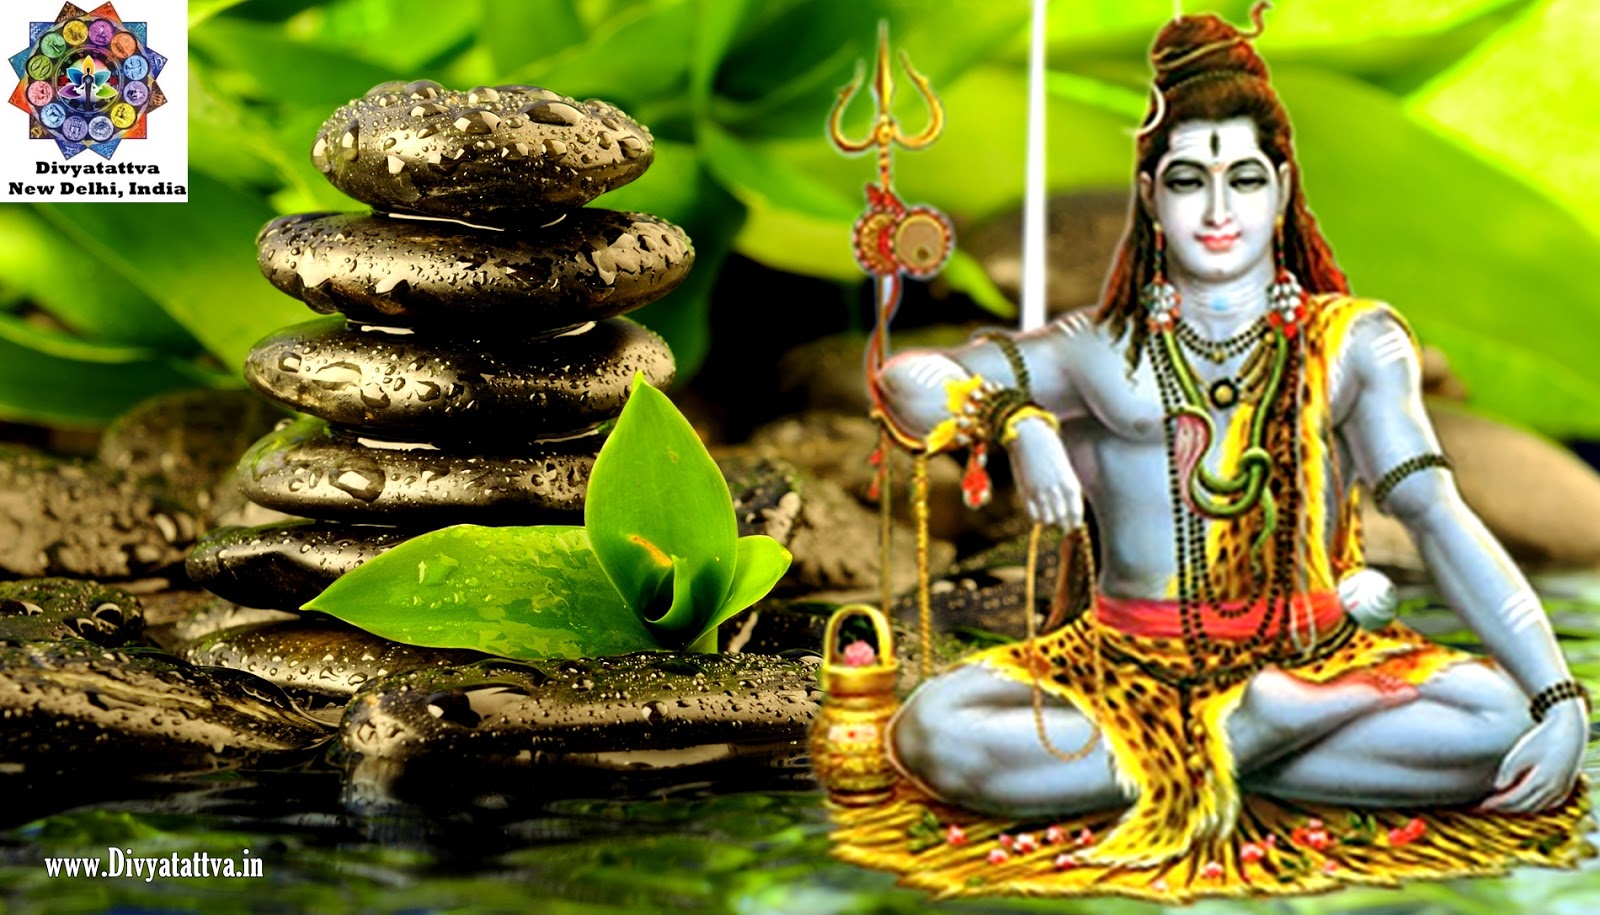 Lord Shiva 4kUltra HD Wallpaper Rudra Shanker High Resoution images